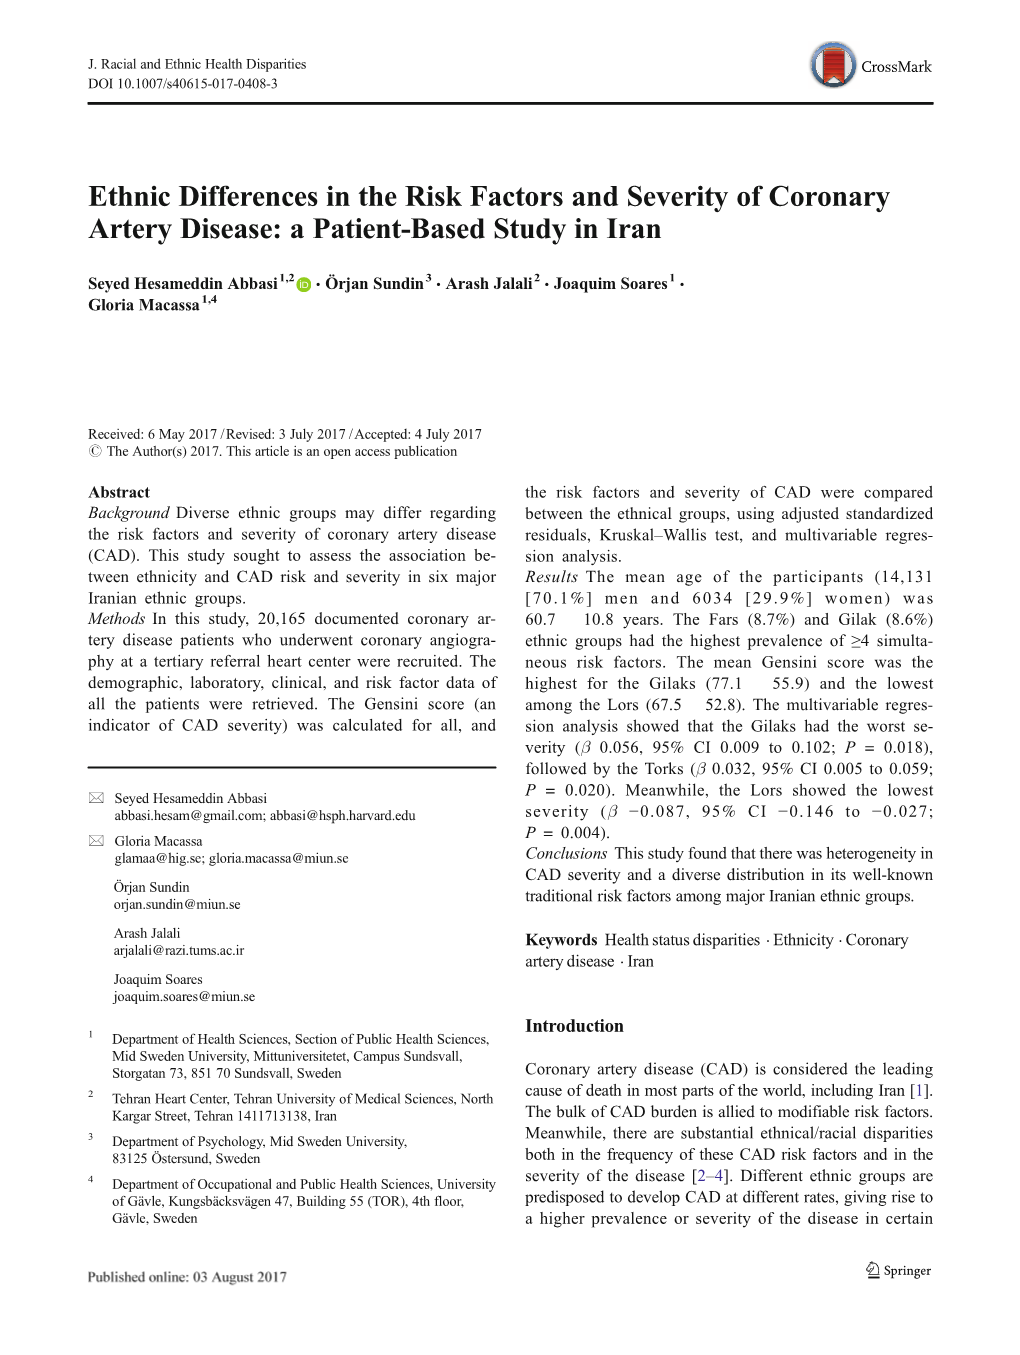 Ethnic Differences in the Risk Factors and Severity of Coronary Artery Disease: a Patient-Based Study in Iran